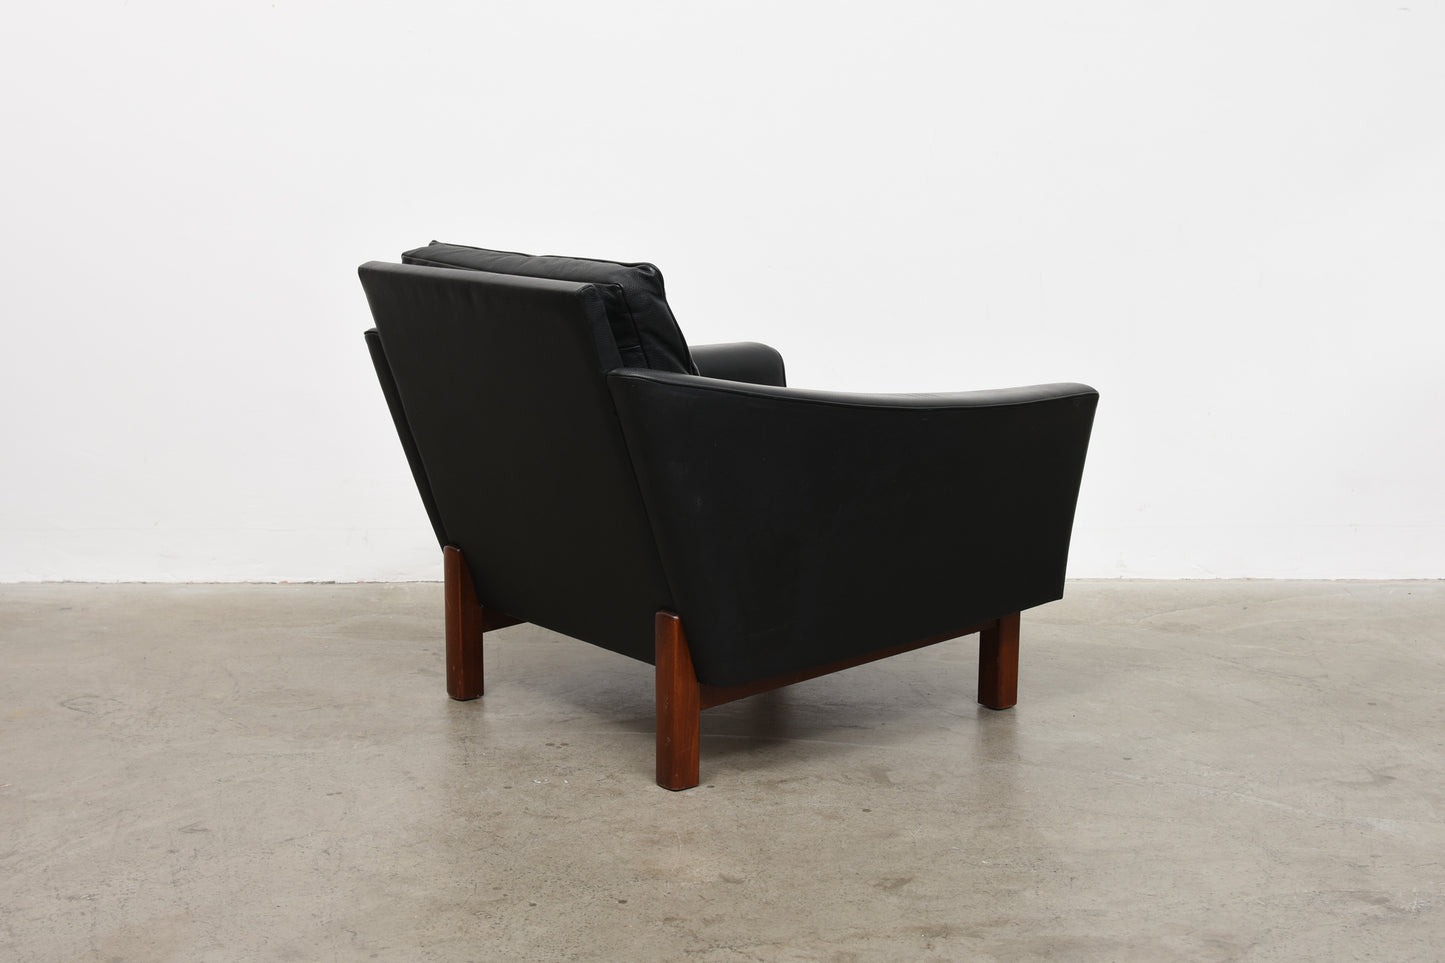 1960s Danish leather lounger